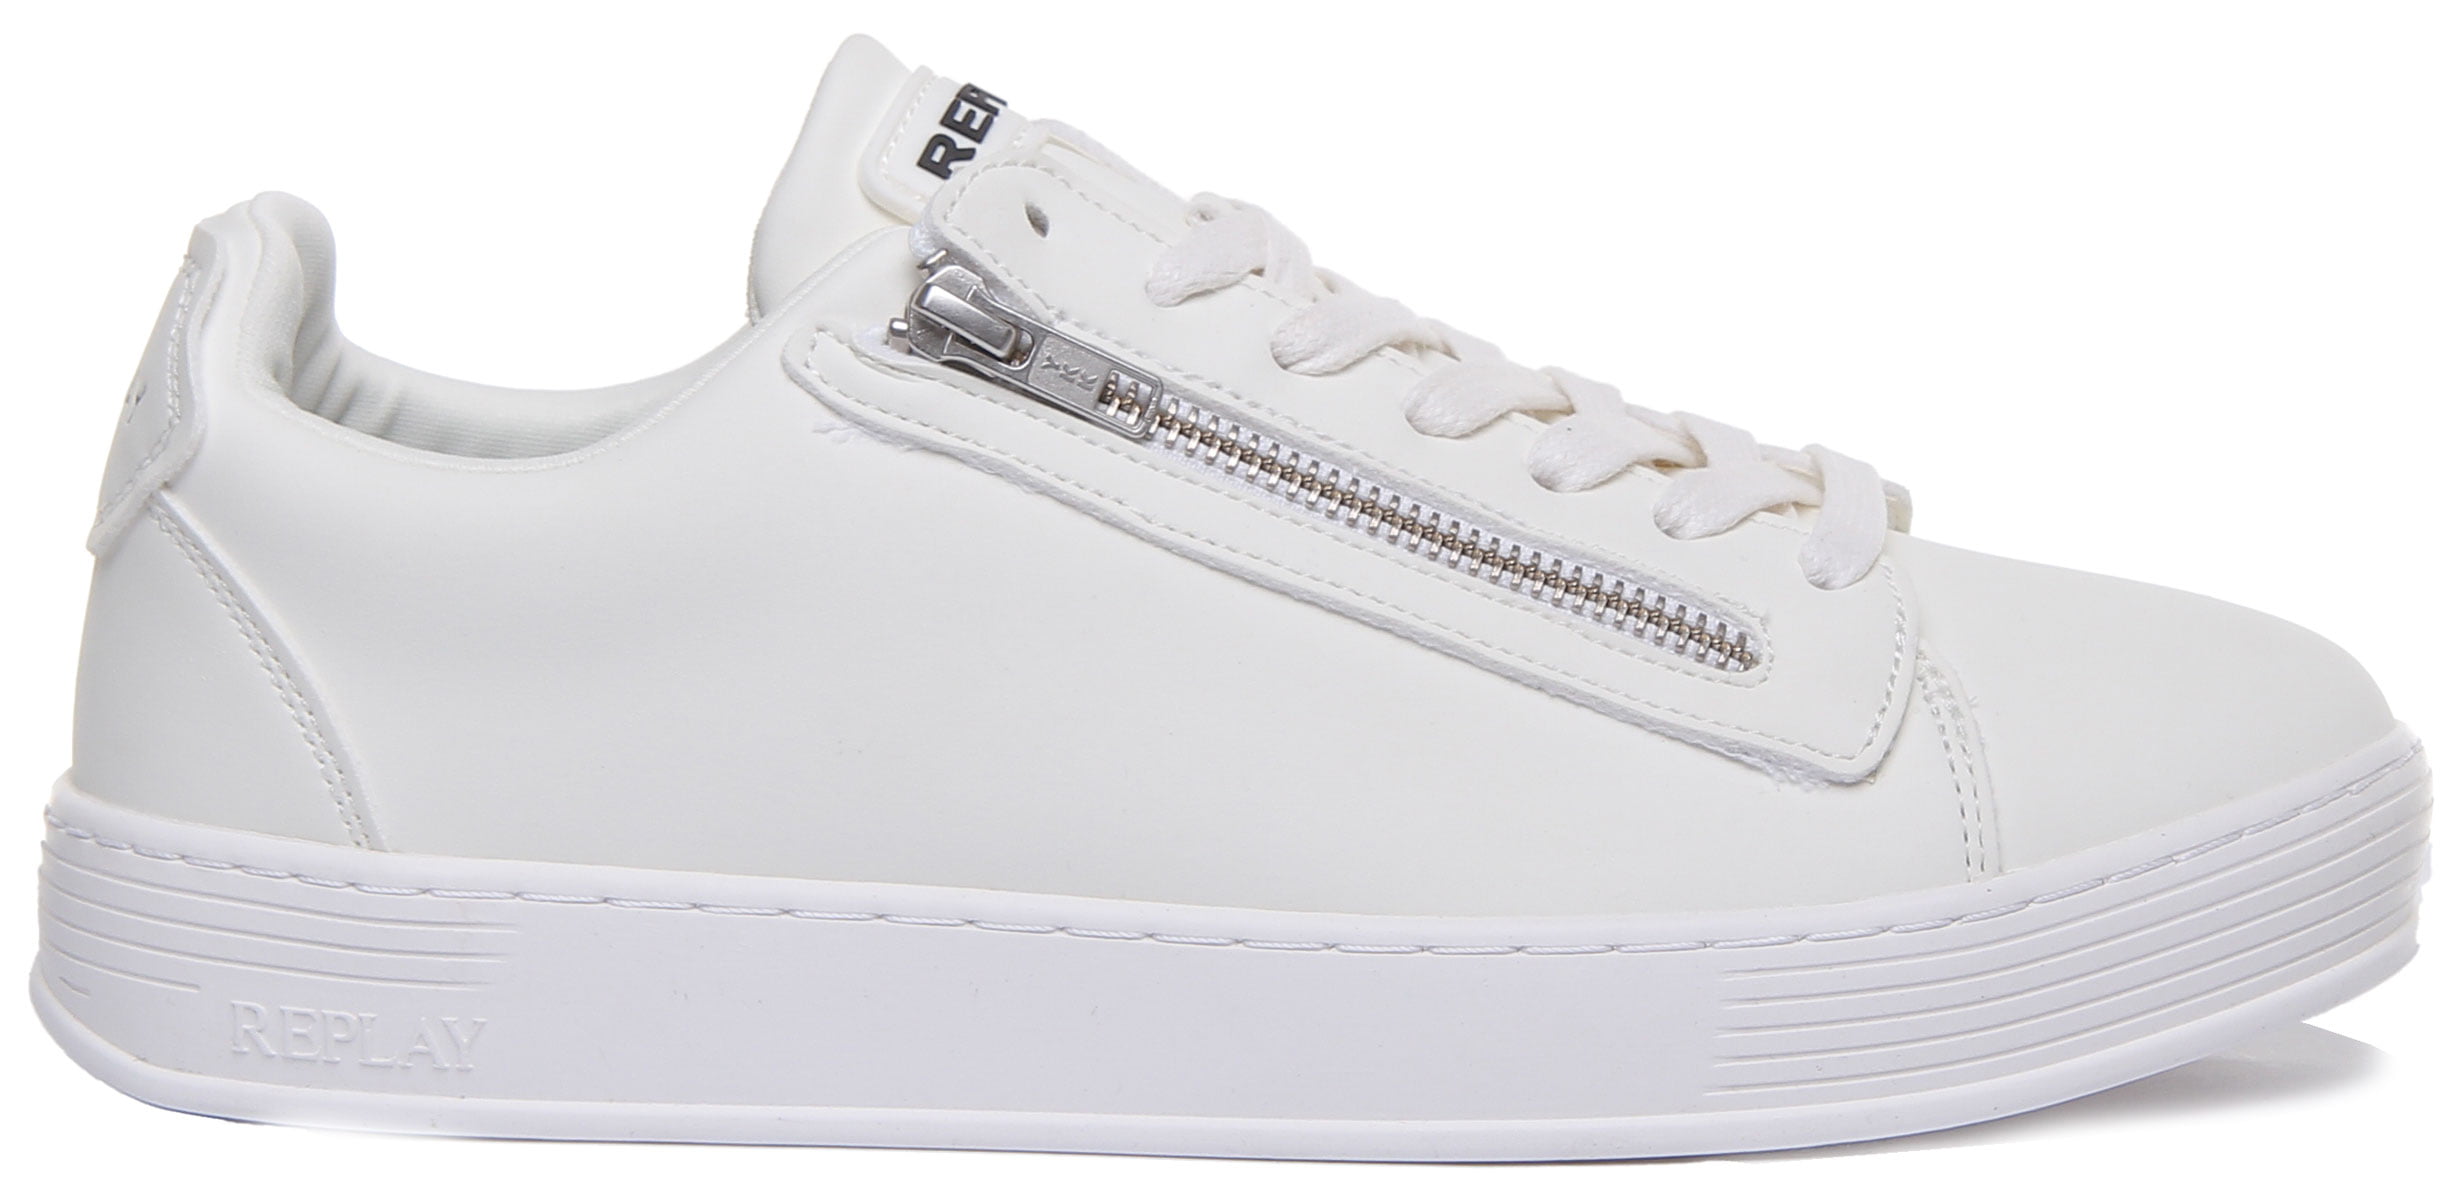 Replay hi top trainer in white